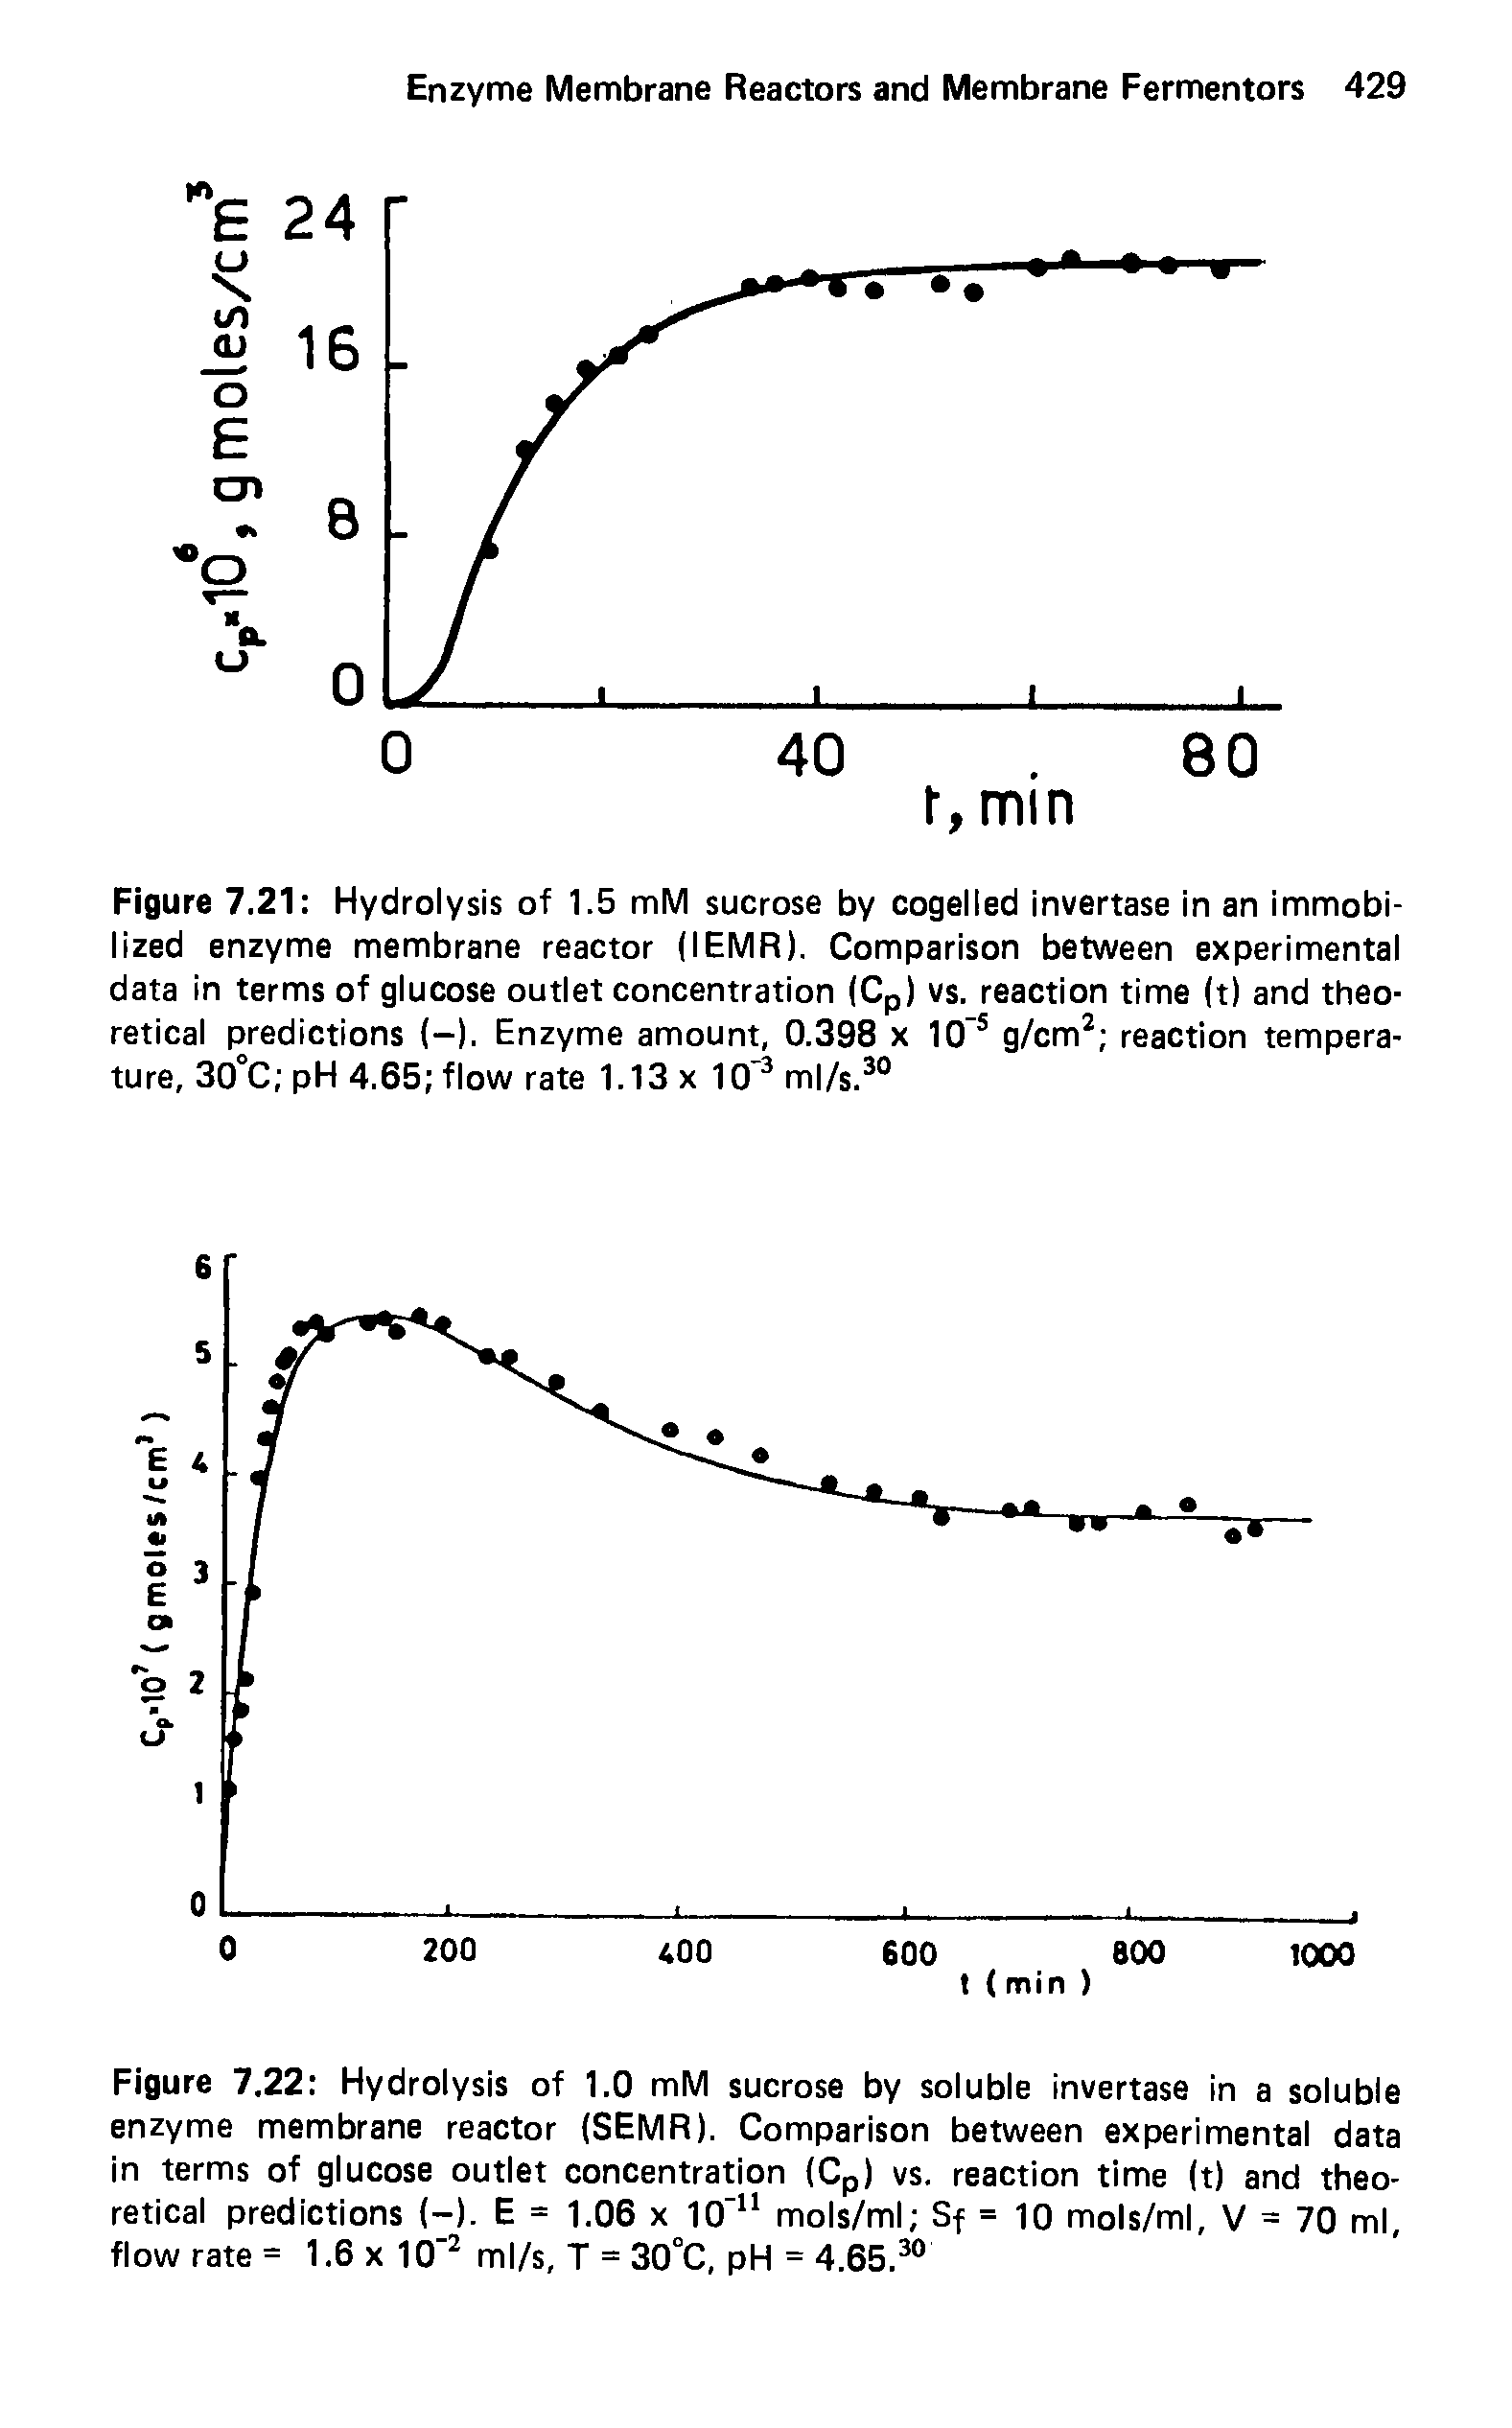 Figure 7.21 Hydrolysis of 1.5 mM sucrose by cogelled invertase in an immobilized enzyme membrane reactor (IEMR). Comparison between experimental data in terms of glucose outlet concentration (Cp) vs. reaction time (t) and theoretical predictions (-). Enzyme amount, 0.398 x 10 s g/cm2 reaction temperature, 30°C pH 4.65 flow rate 1.13 x 103 ml/s.30...